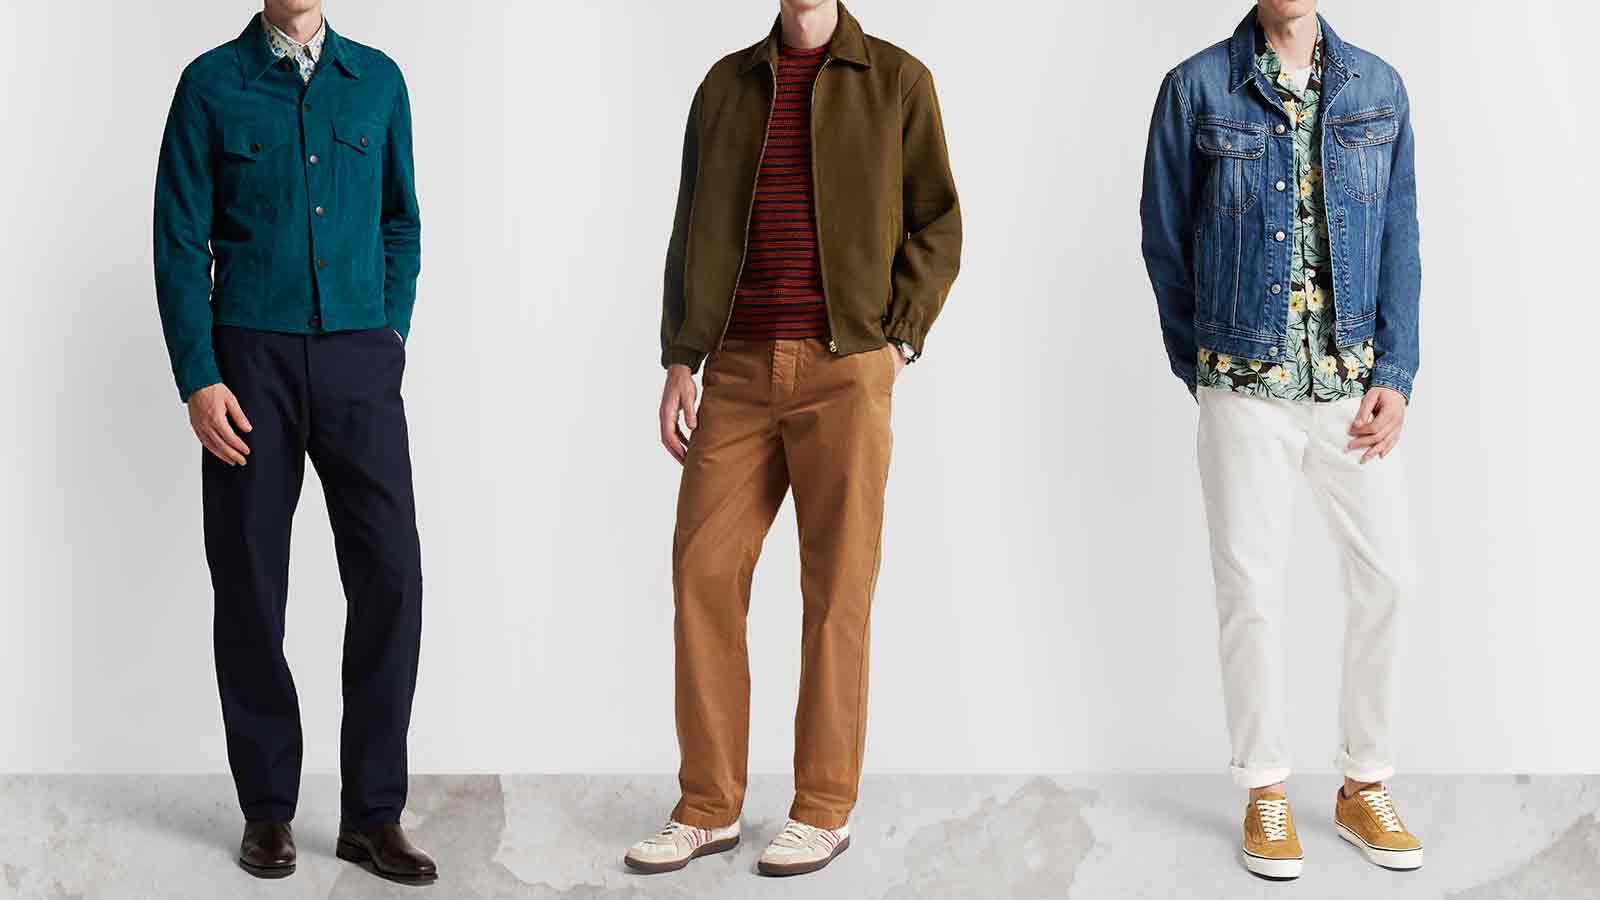 Three Ways To Wear The 1970s Trend | The Journal | MR PORTER